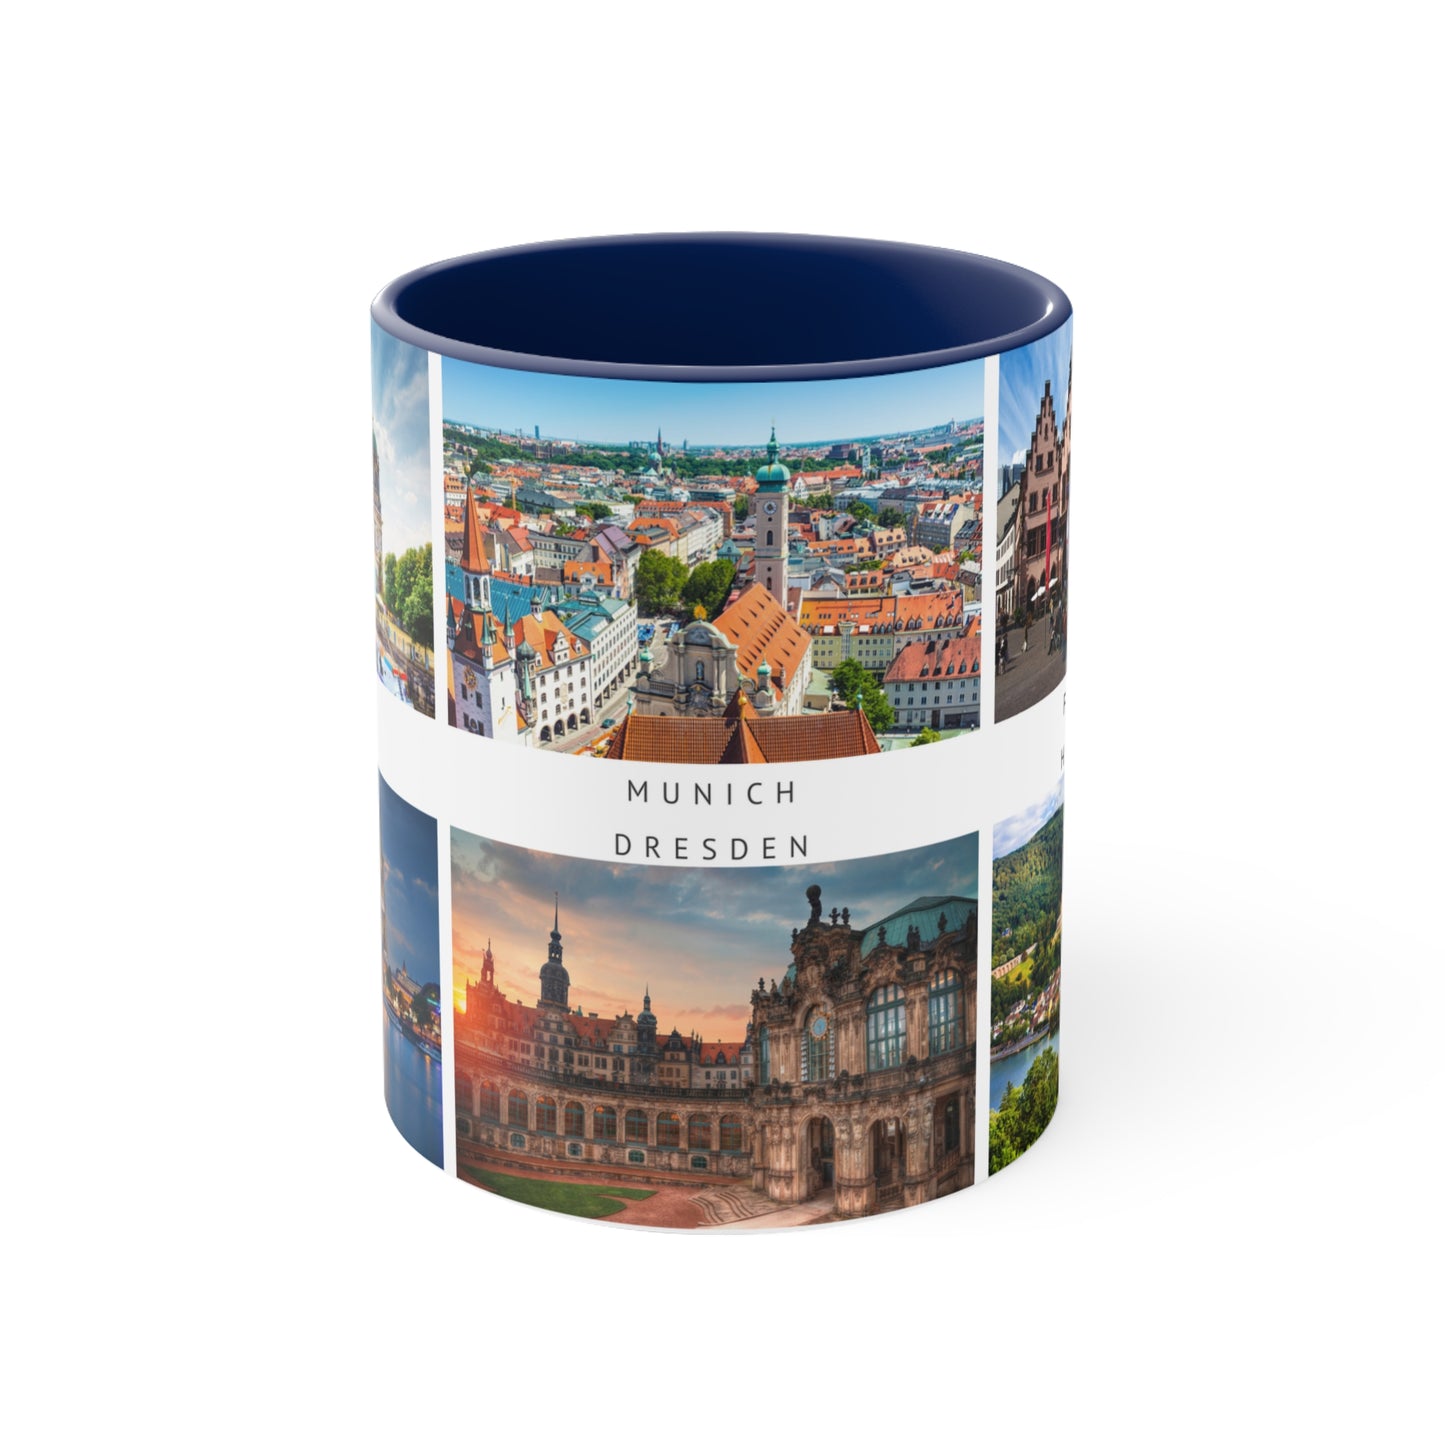 Germany has so much to offer! This Travel Accent Coffee Mug is a part of a Travel Series for you to choose from. 11oz. Great as a gift or get one to enjoy yourself.